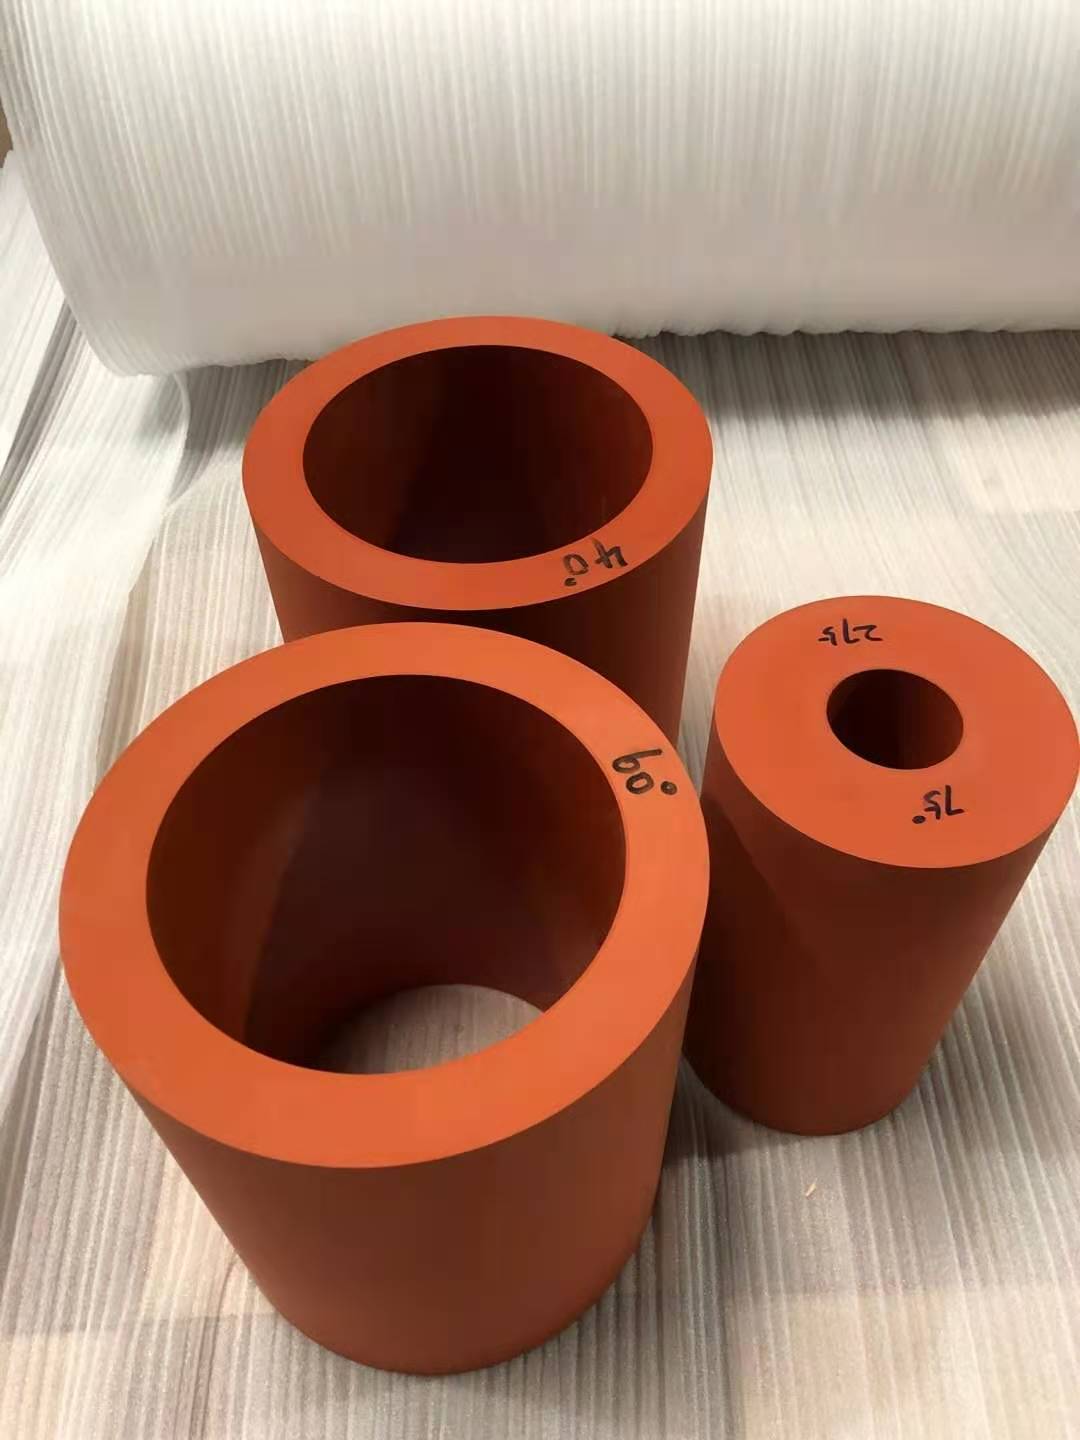 This product is made of imported high-quality silicone rubber materials and advanced production technology. The product has the characteristics of good sealing performance, stable use performance, corrosion resistance, aging resistance, beautiful appearance, and excellent internal quality.